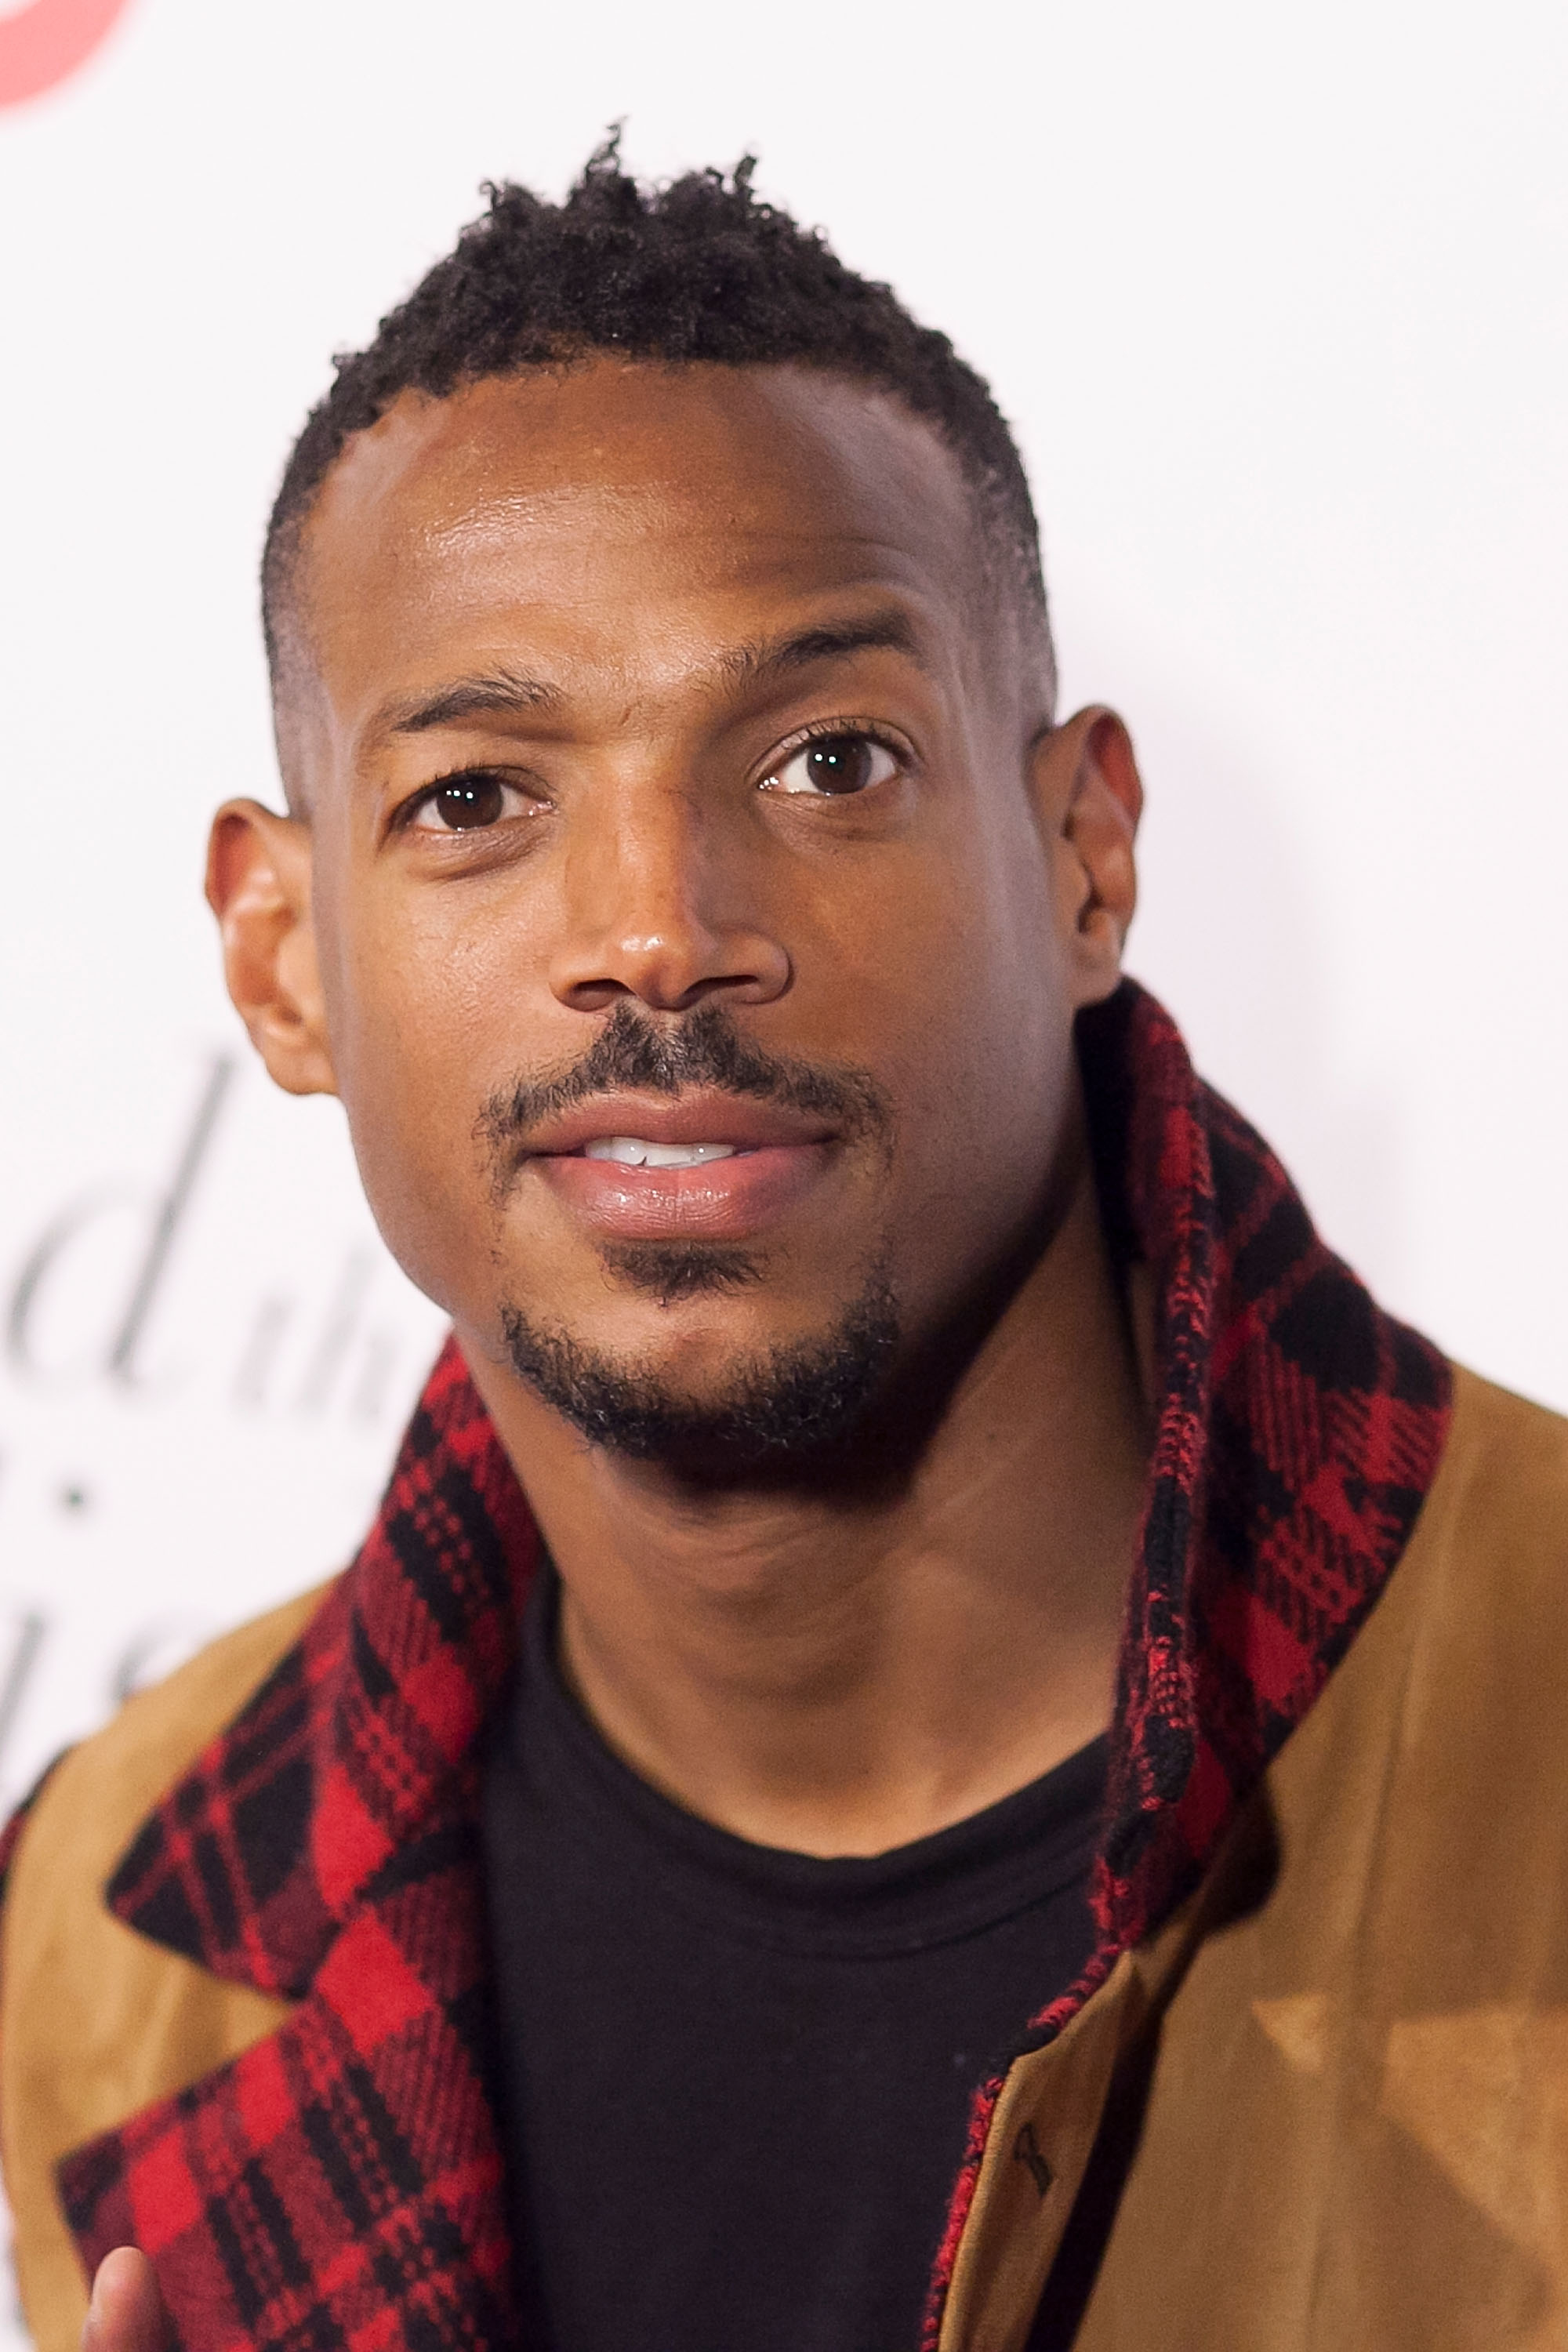 Marlon Wayans arrives for "Beyond The Lights" - Los Angeles Premiere at ArcLight Hollywood on November 12, 2014 in Hollywood, California. (Gabriel Olsen&mdash;FilmMagic/Getty Images)